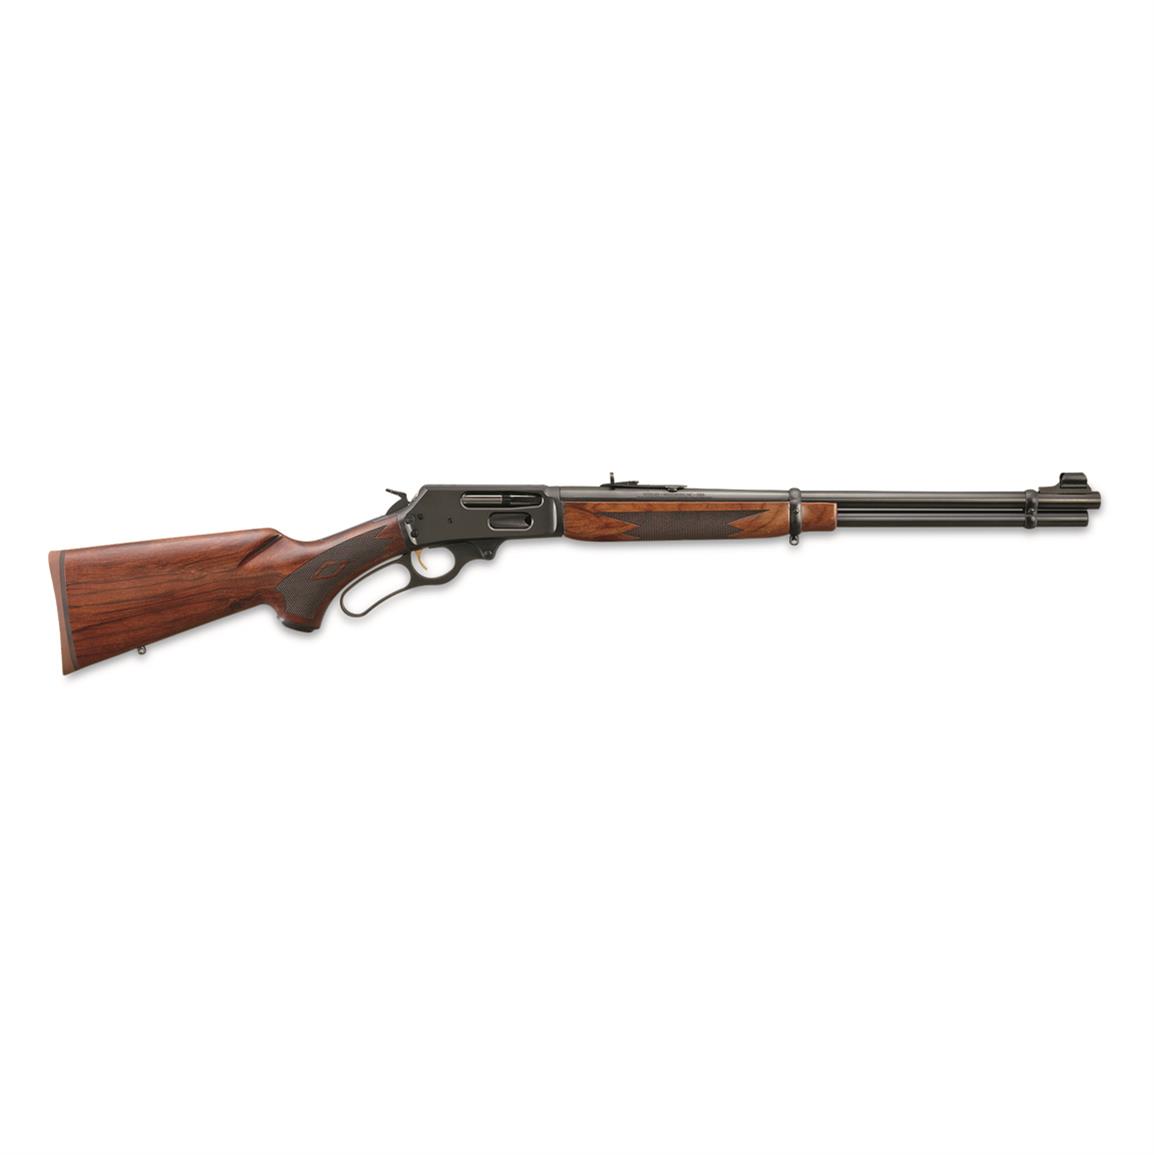 Marlin Model 336 Classic, Lever Action, .30-30 Win., 20.25" Barrel, 6+1 Rounds